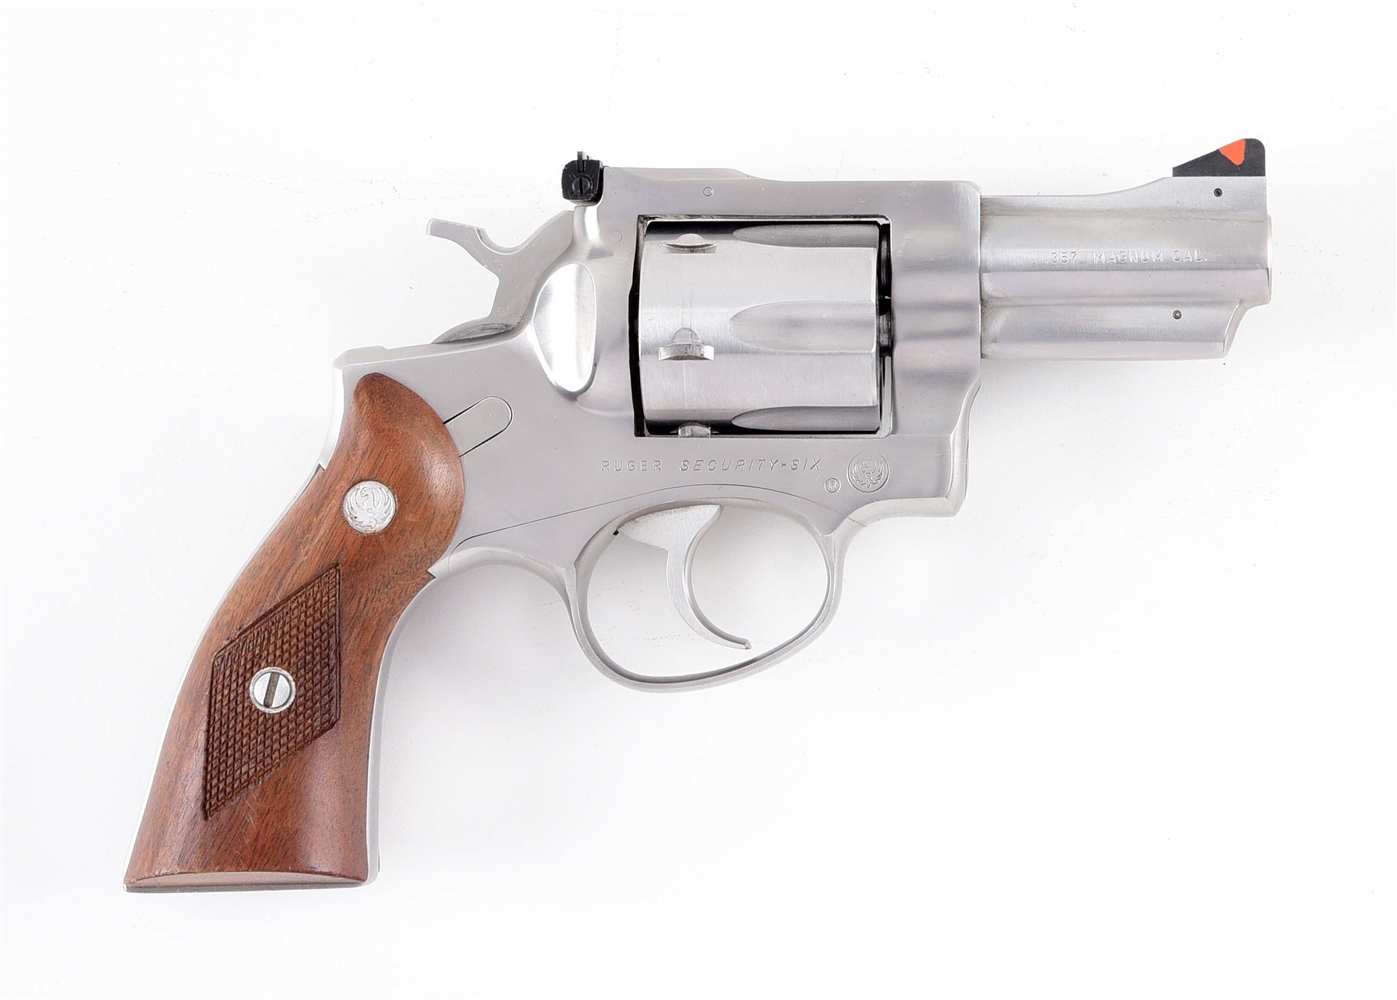 (M) RUGER SECURITY-SIX DOUBLE ACTION .357 MAGNUM REVOLVER.